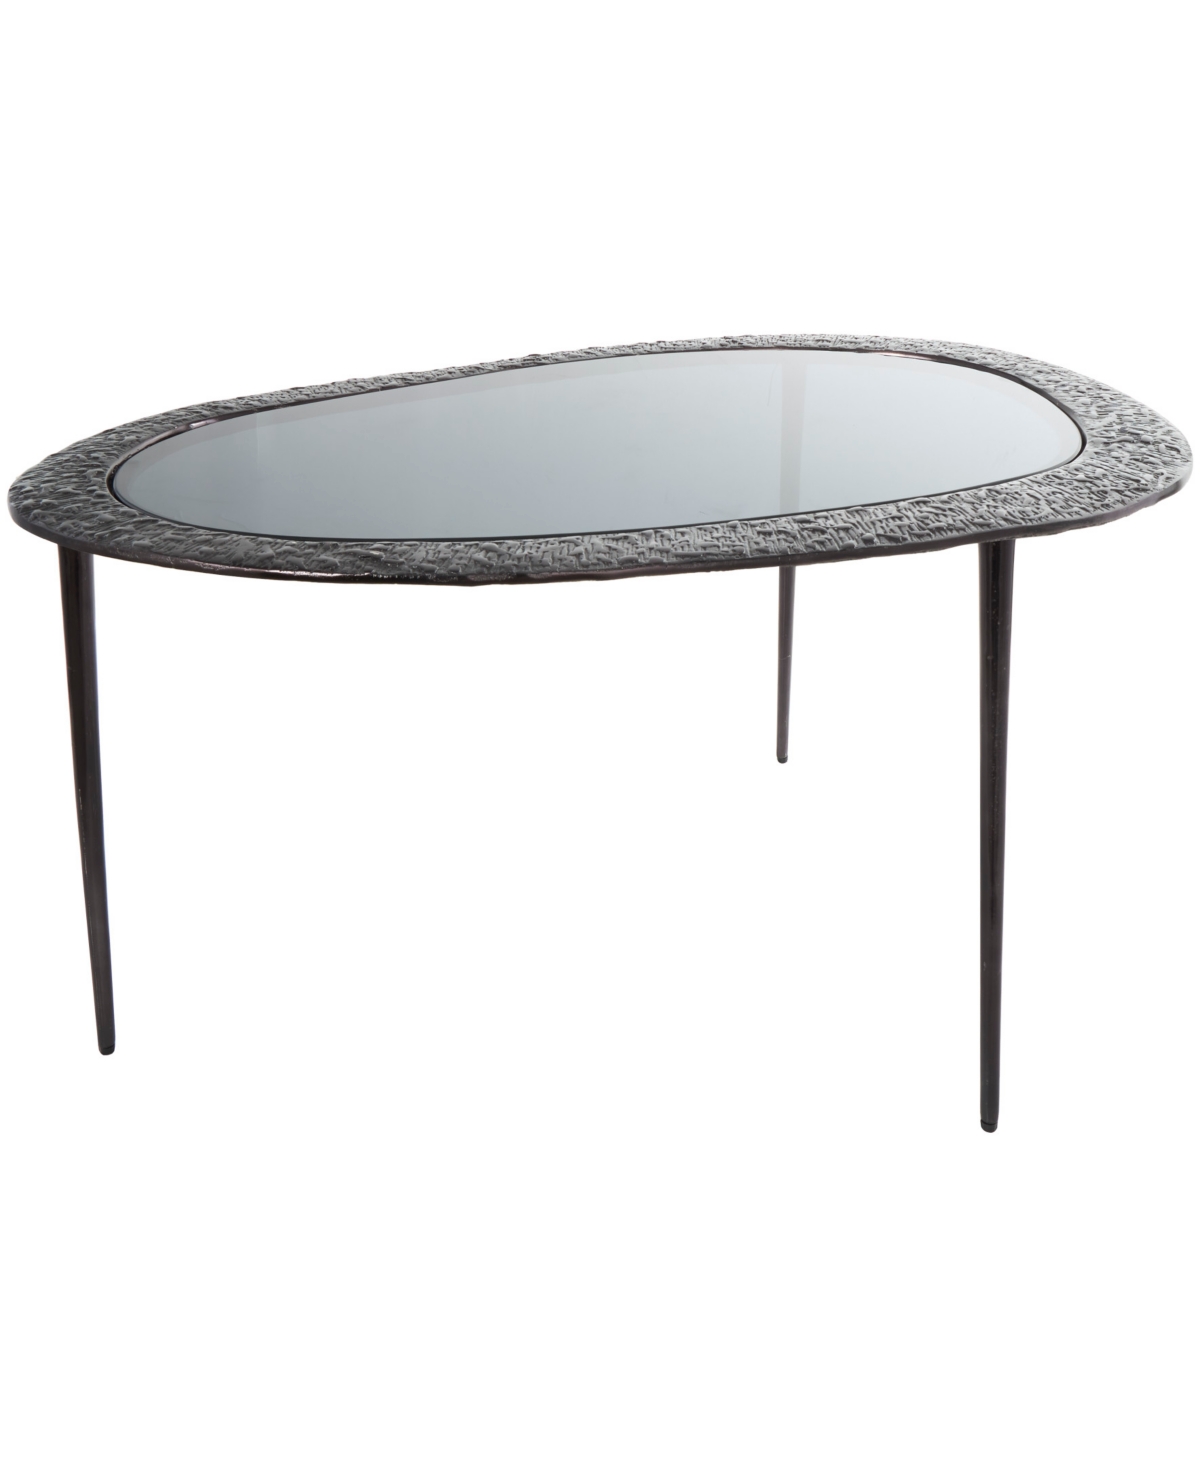 Rosemary Lane 30" X 25" X 18" Aluminum Abstract Oval Shaped Shaded Glass Top And Detailed Engravings Coffee Table In Black